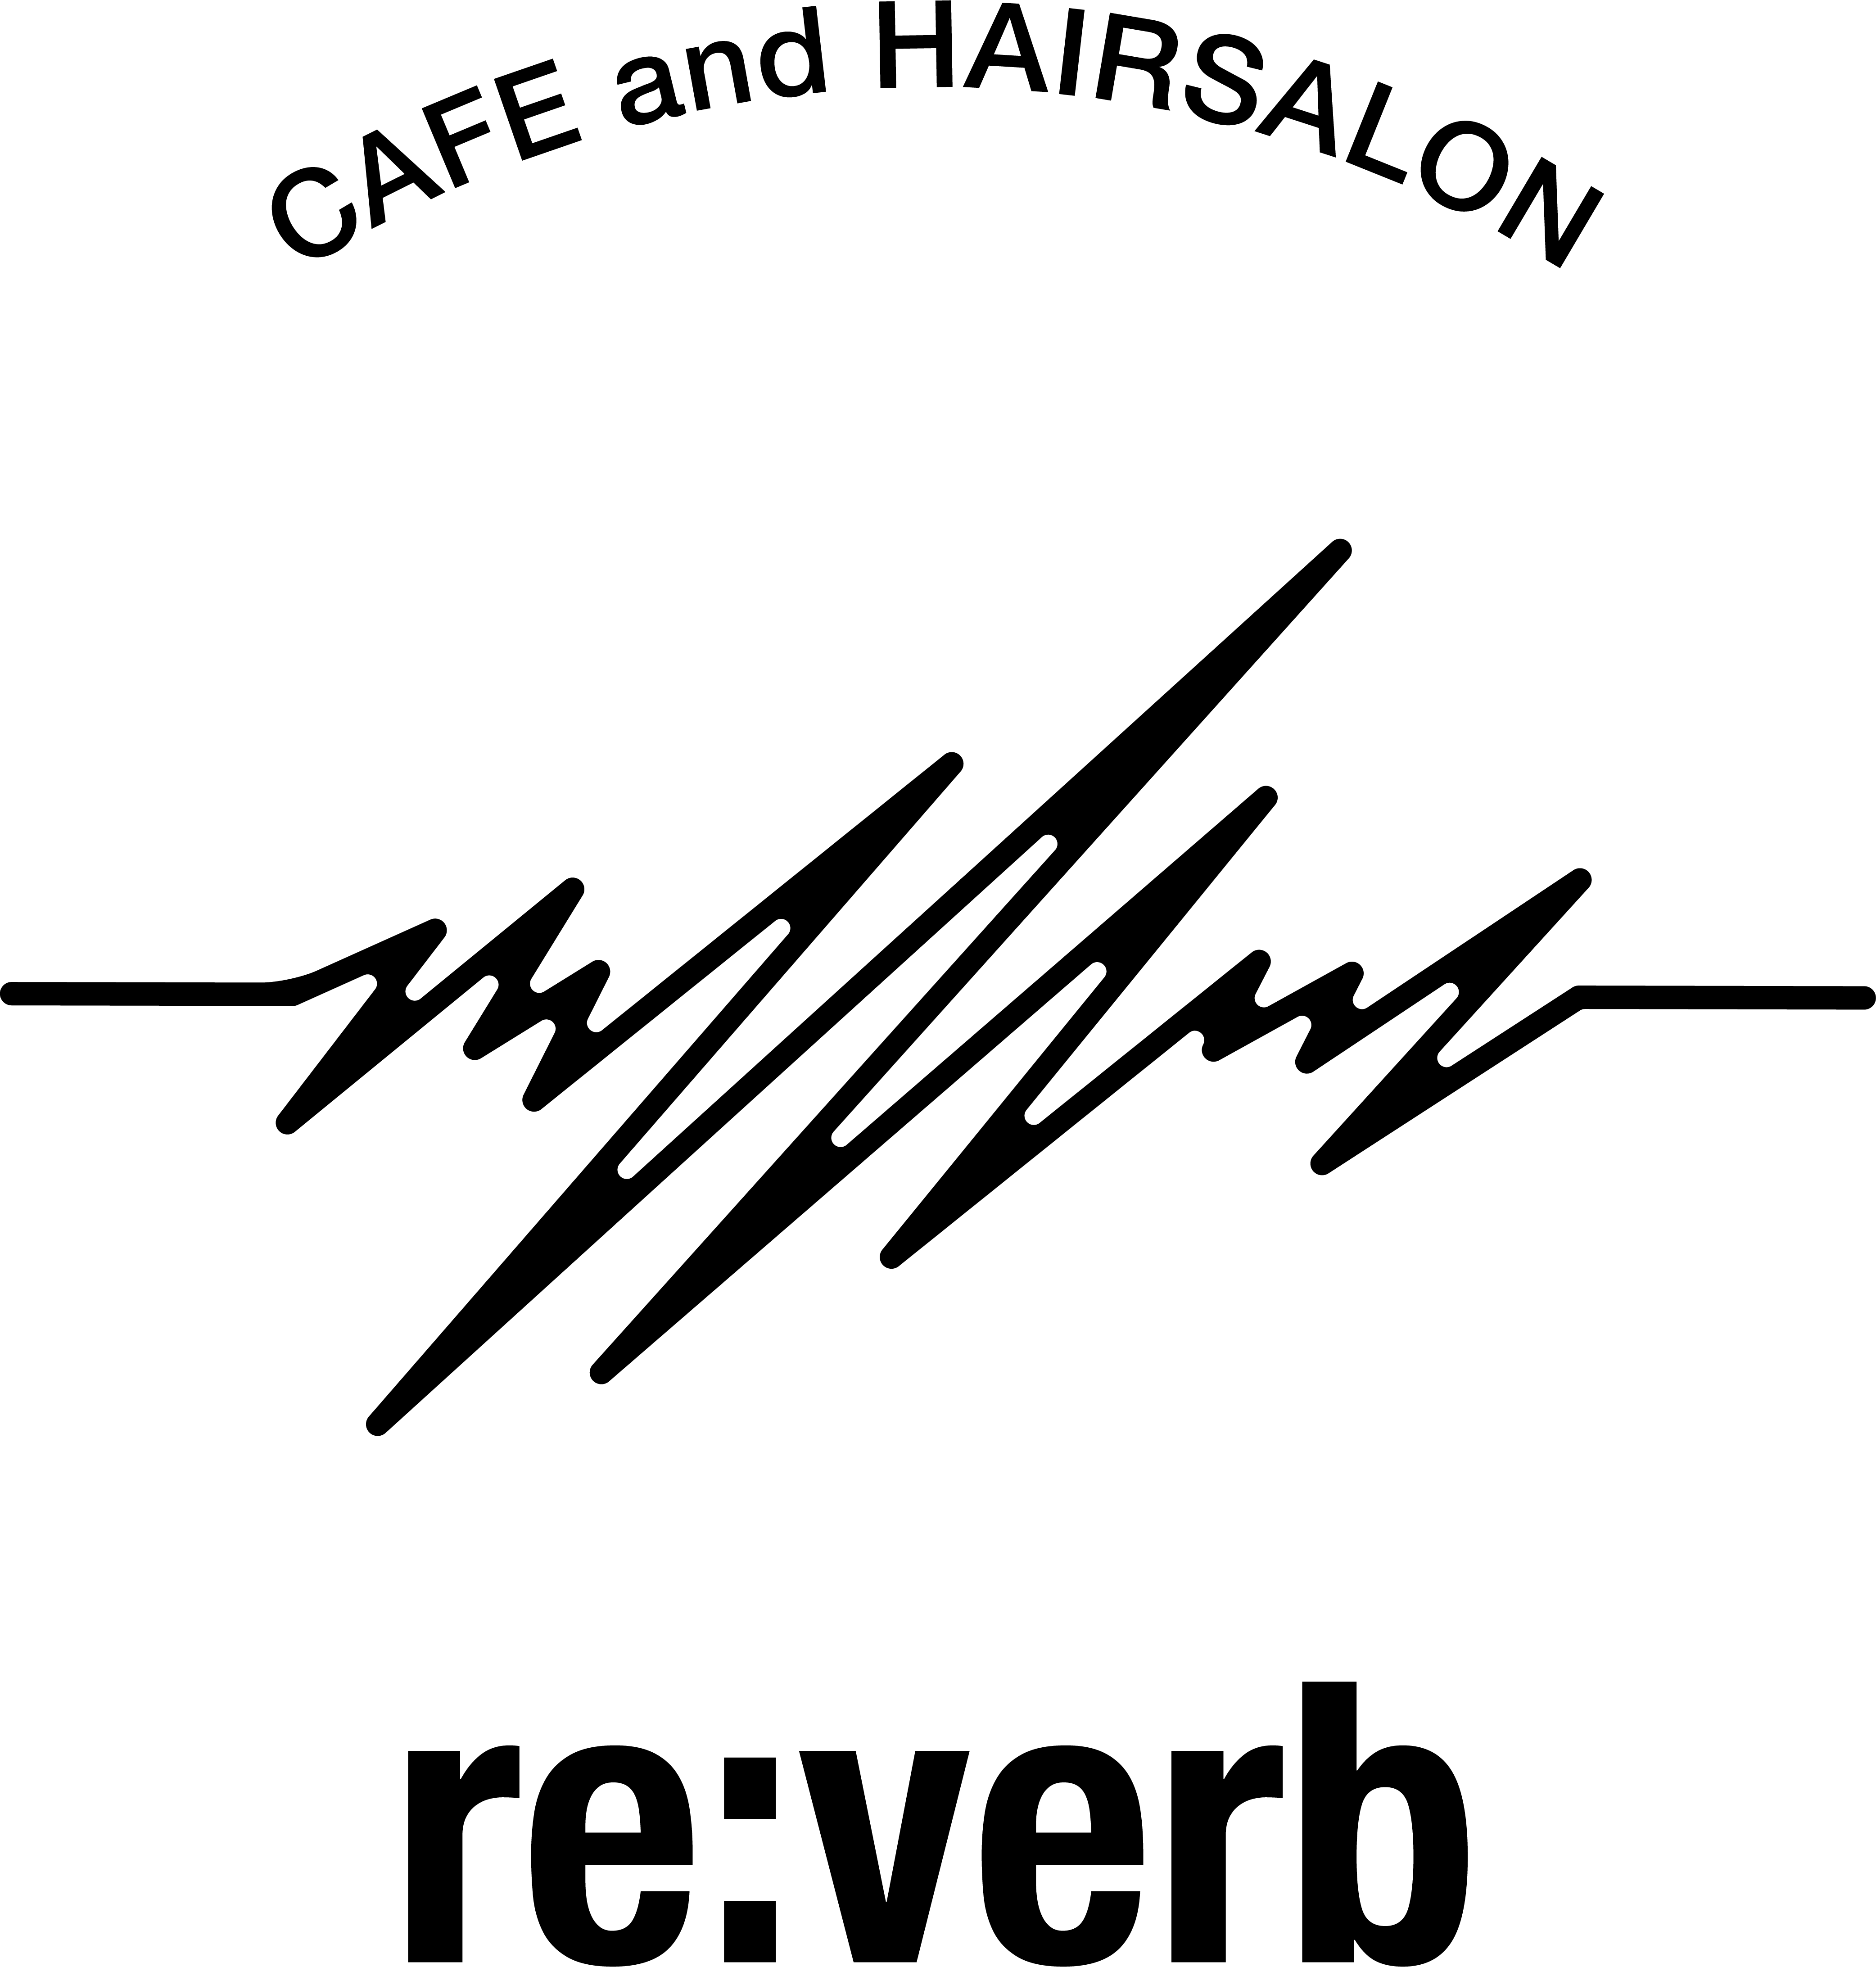 CAFE and HAIR SALON re:verb